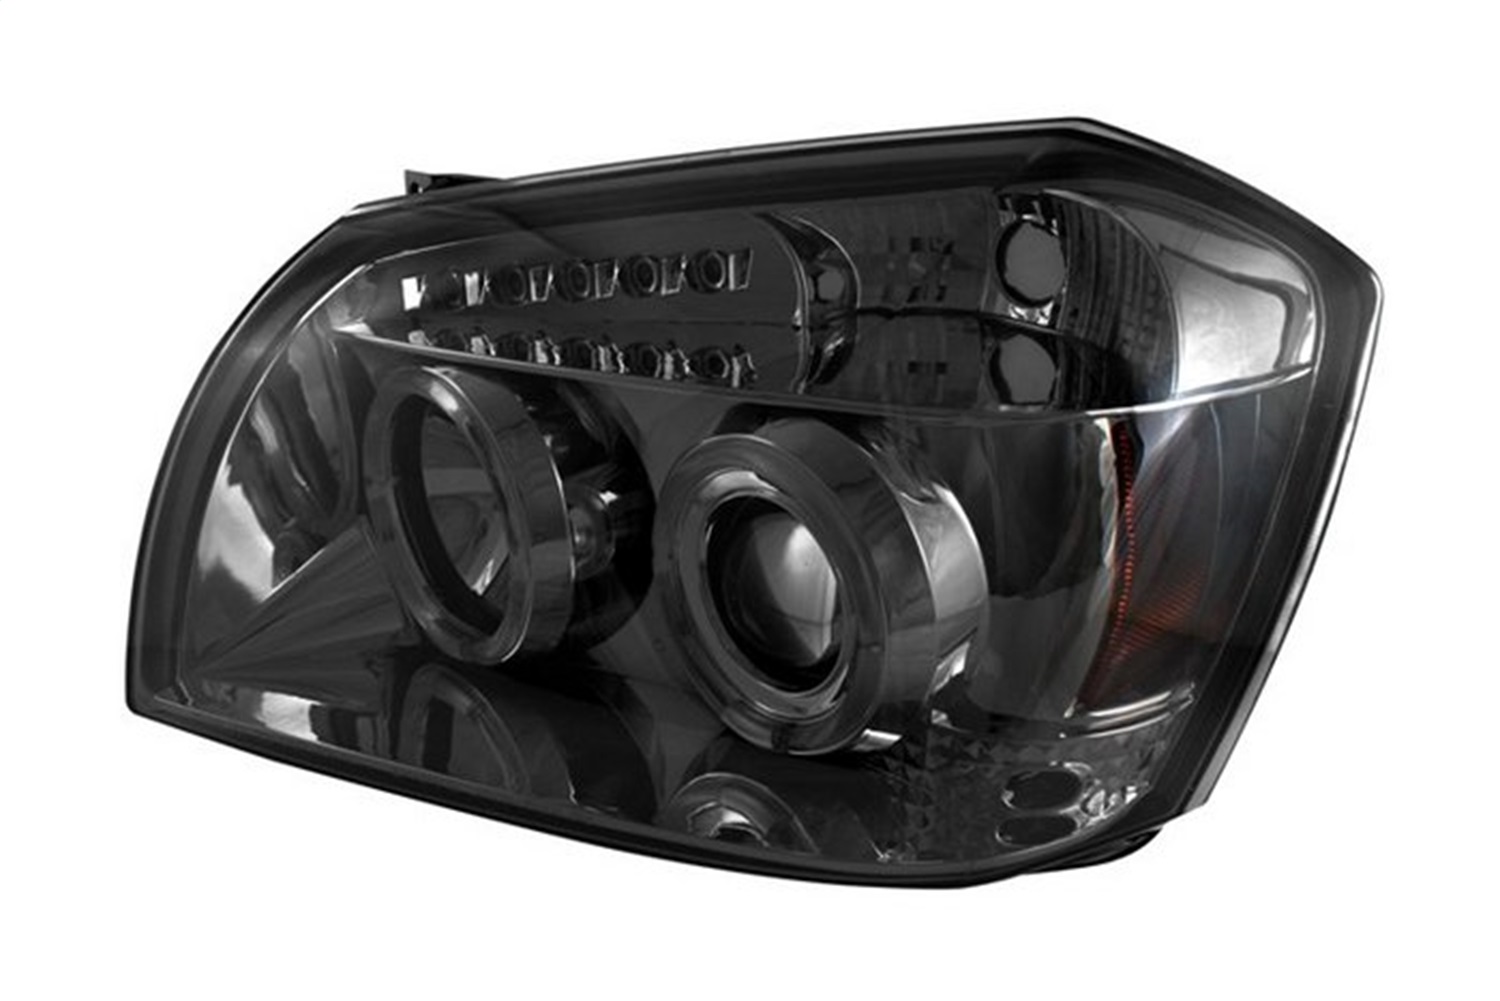 Spyder Auto 5009890 Halo LED Projector Headlights Fits 05-07 Magnum